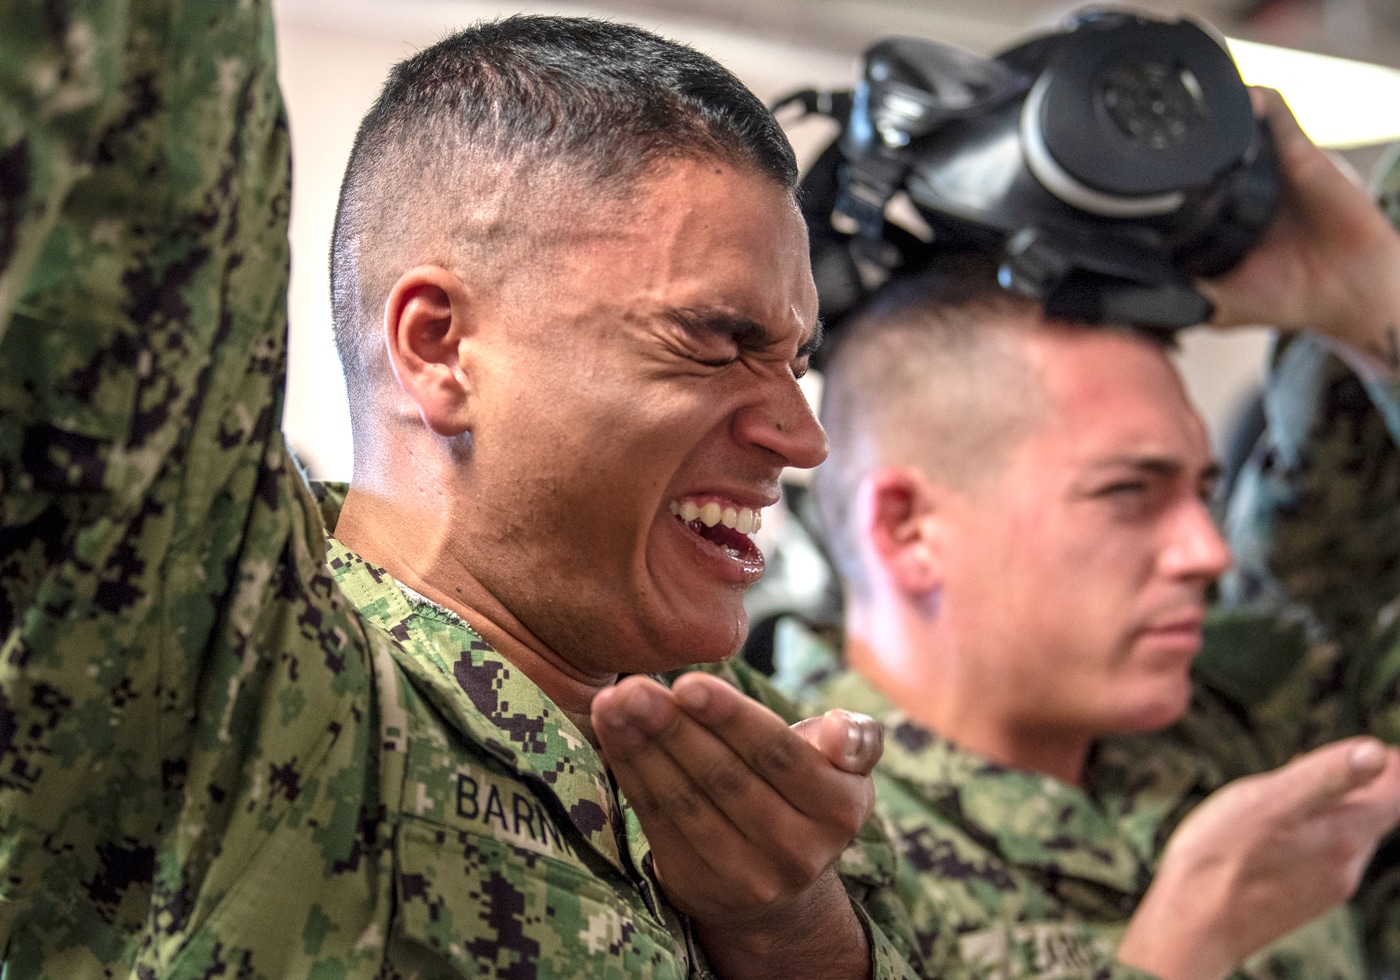 In this photograph, these navy recruits undergo mental toughness training.